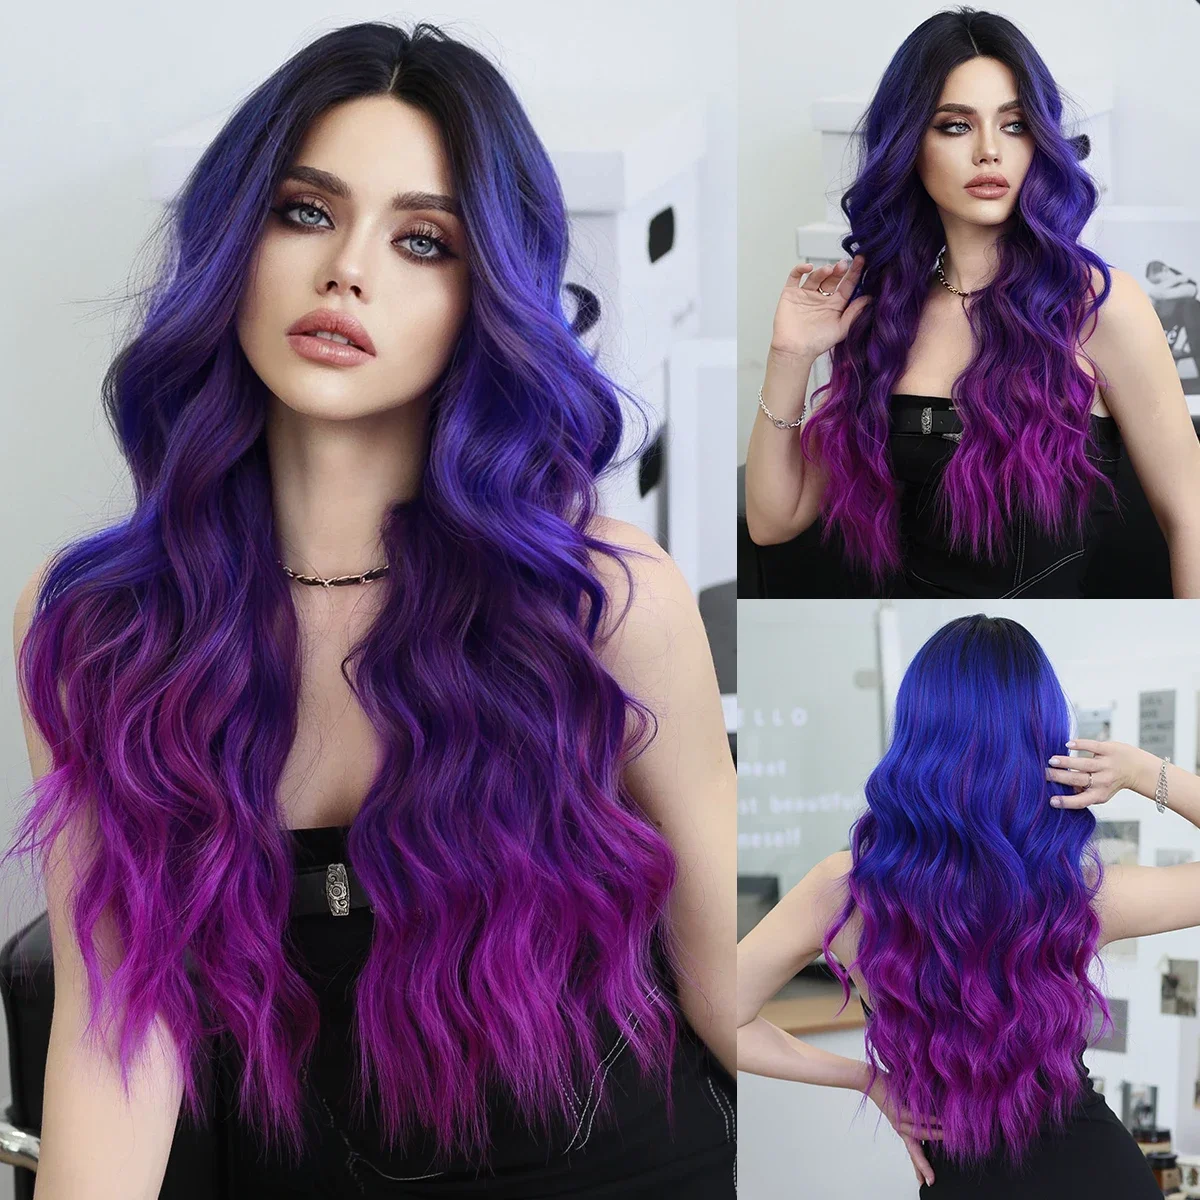 

NAMM Lace Front Wig Synthetic Dream Blue Purple Highlights Long Wavy Wig for Women Natural Looking Lace Mid Split Wig